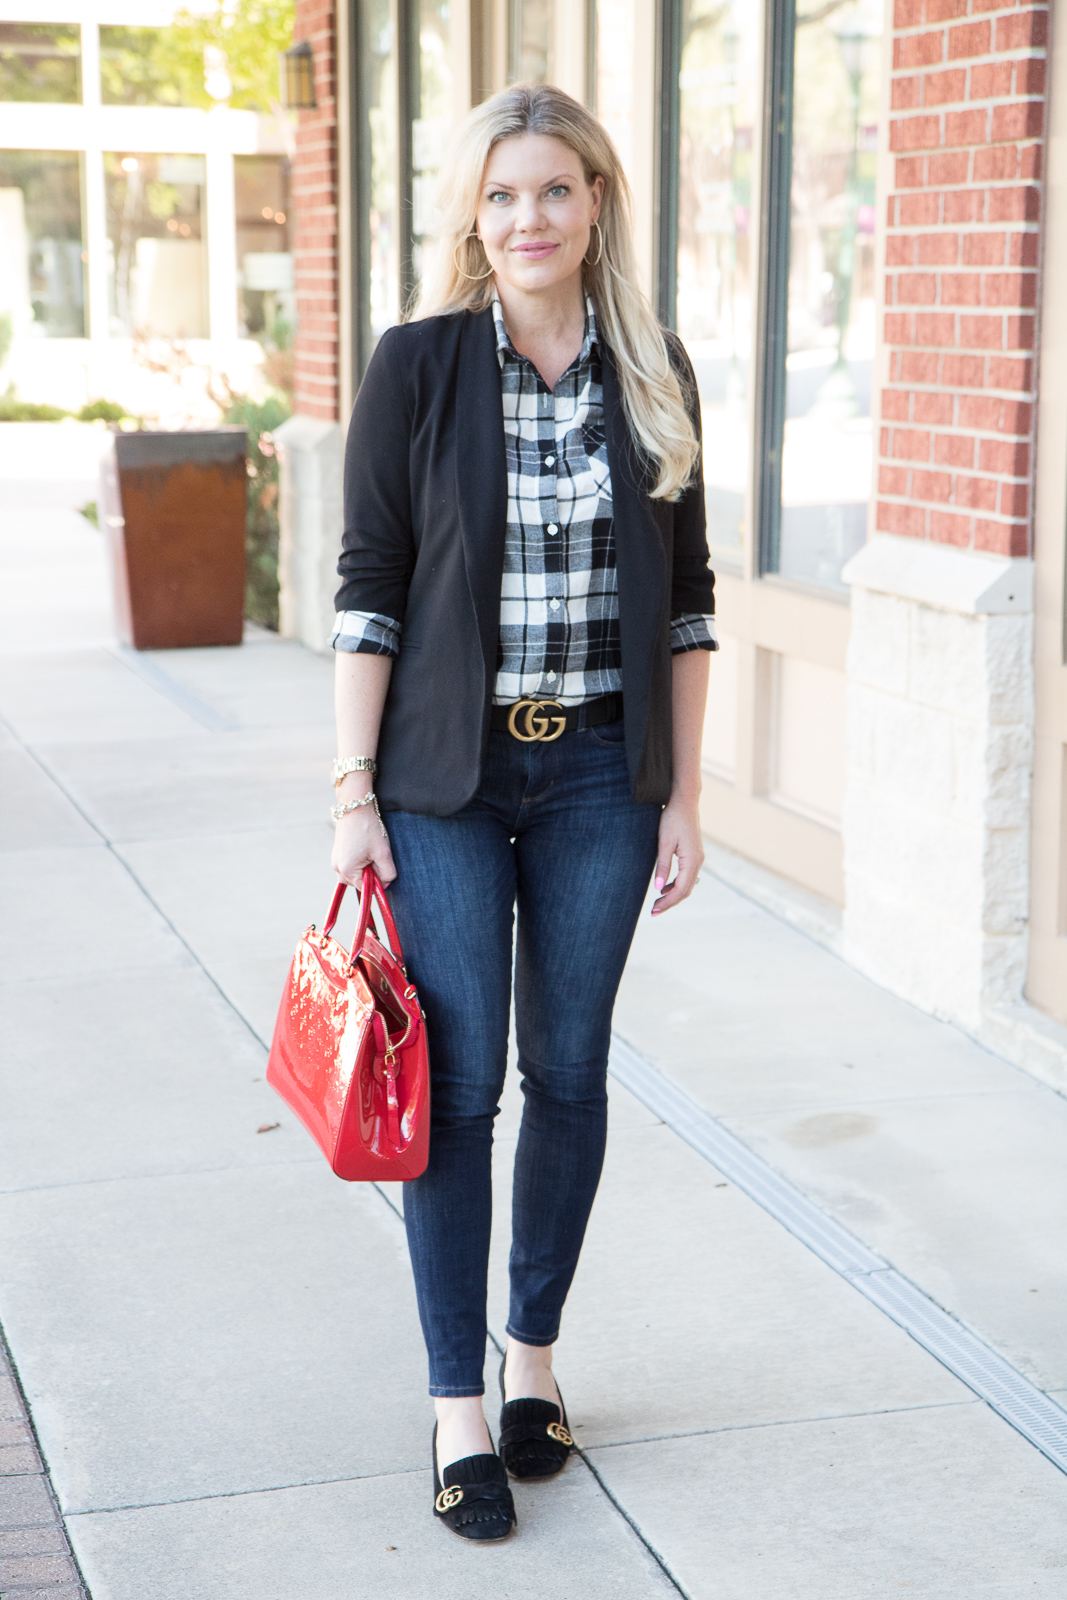 7 WAYS TO WEAR A PLAID SHIRT THIS FALL